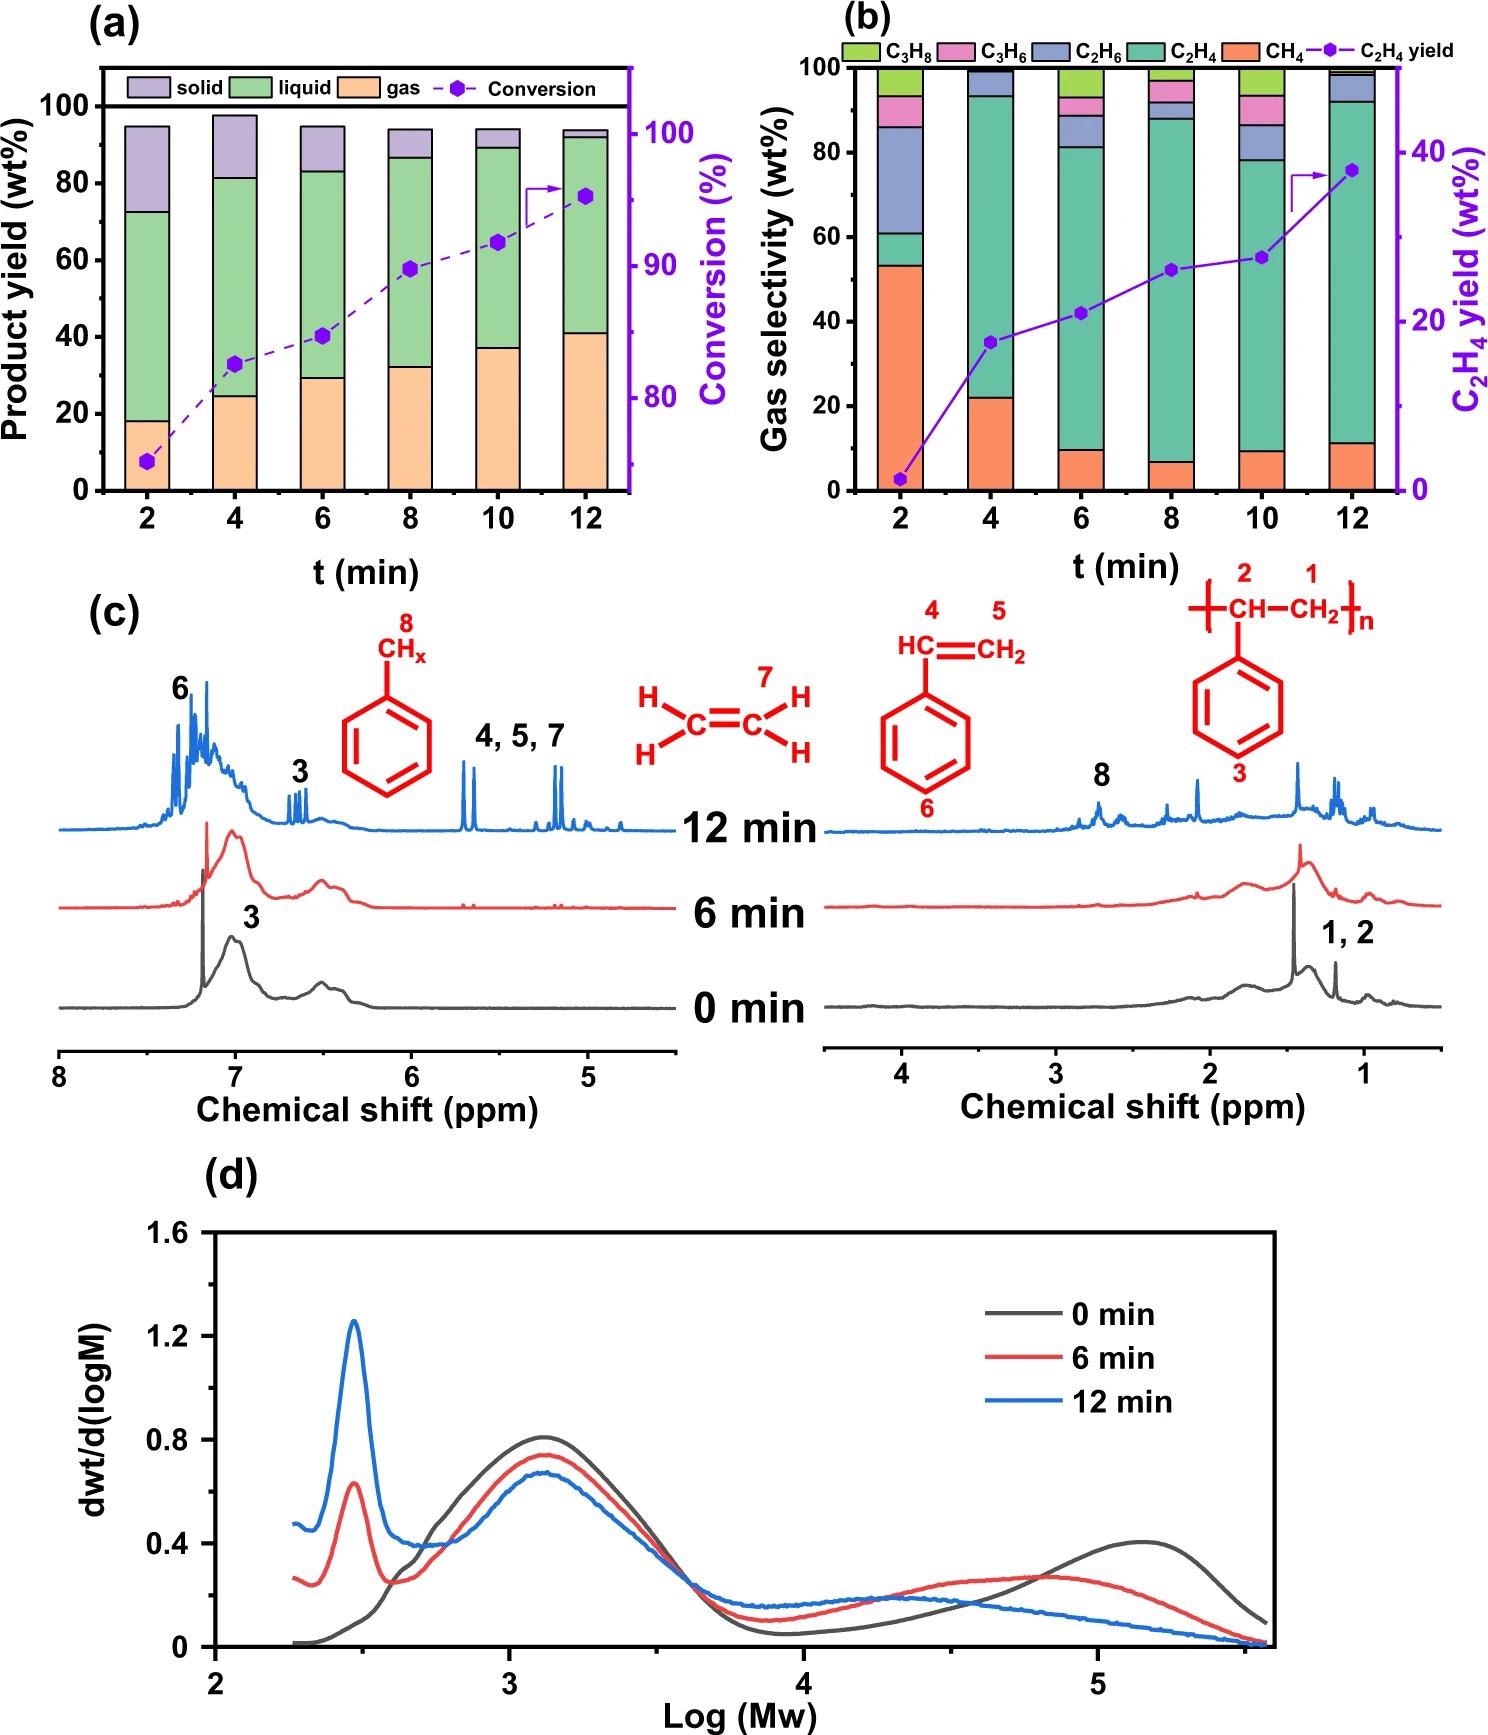 Time-dependent reaction properties of plasma-assisted PS hydrogenolysis.